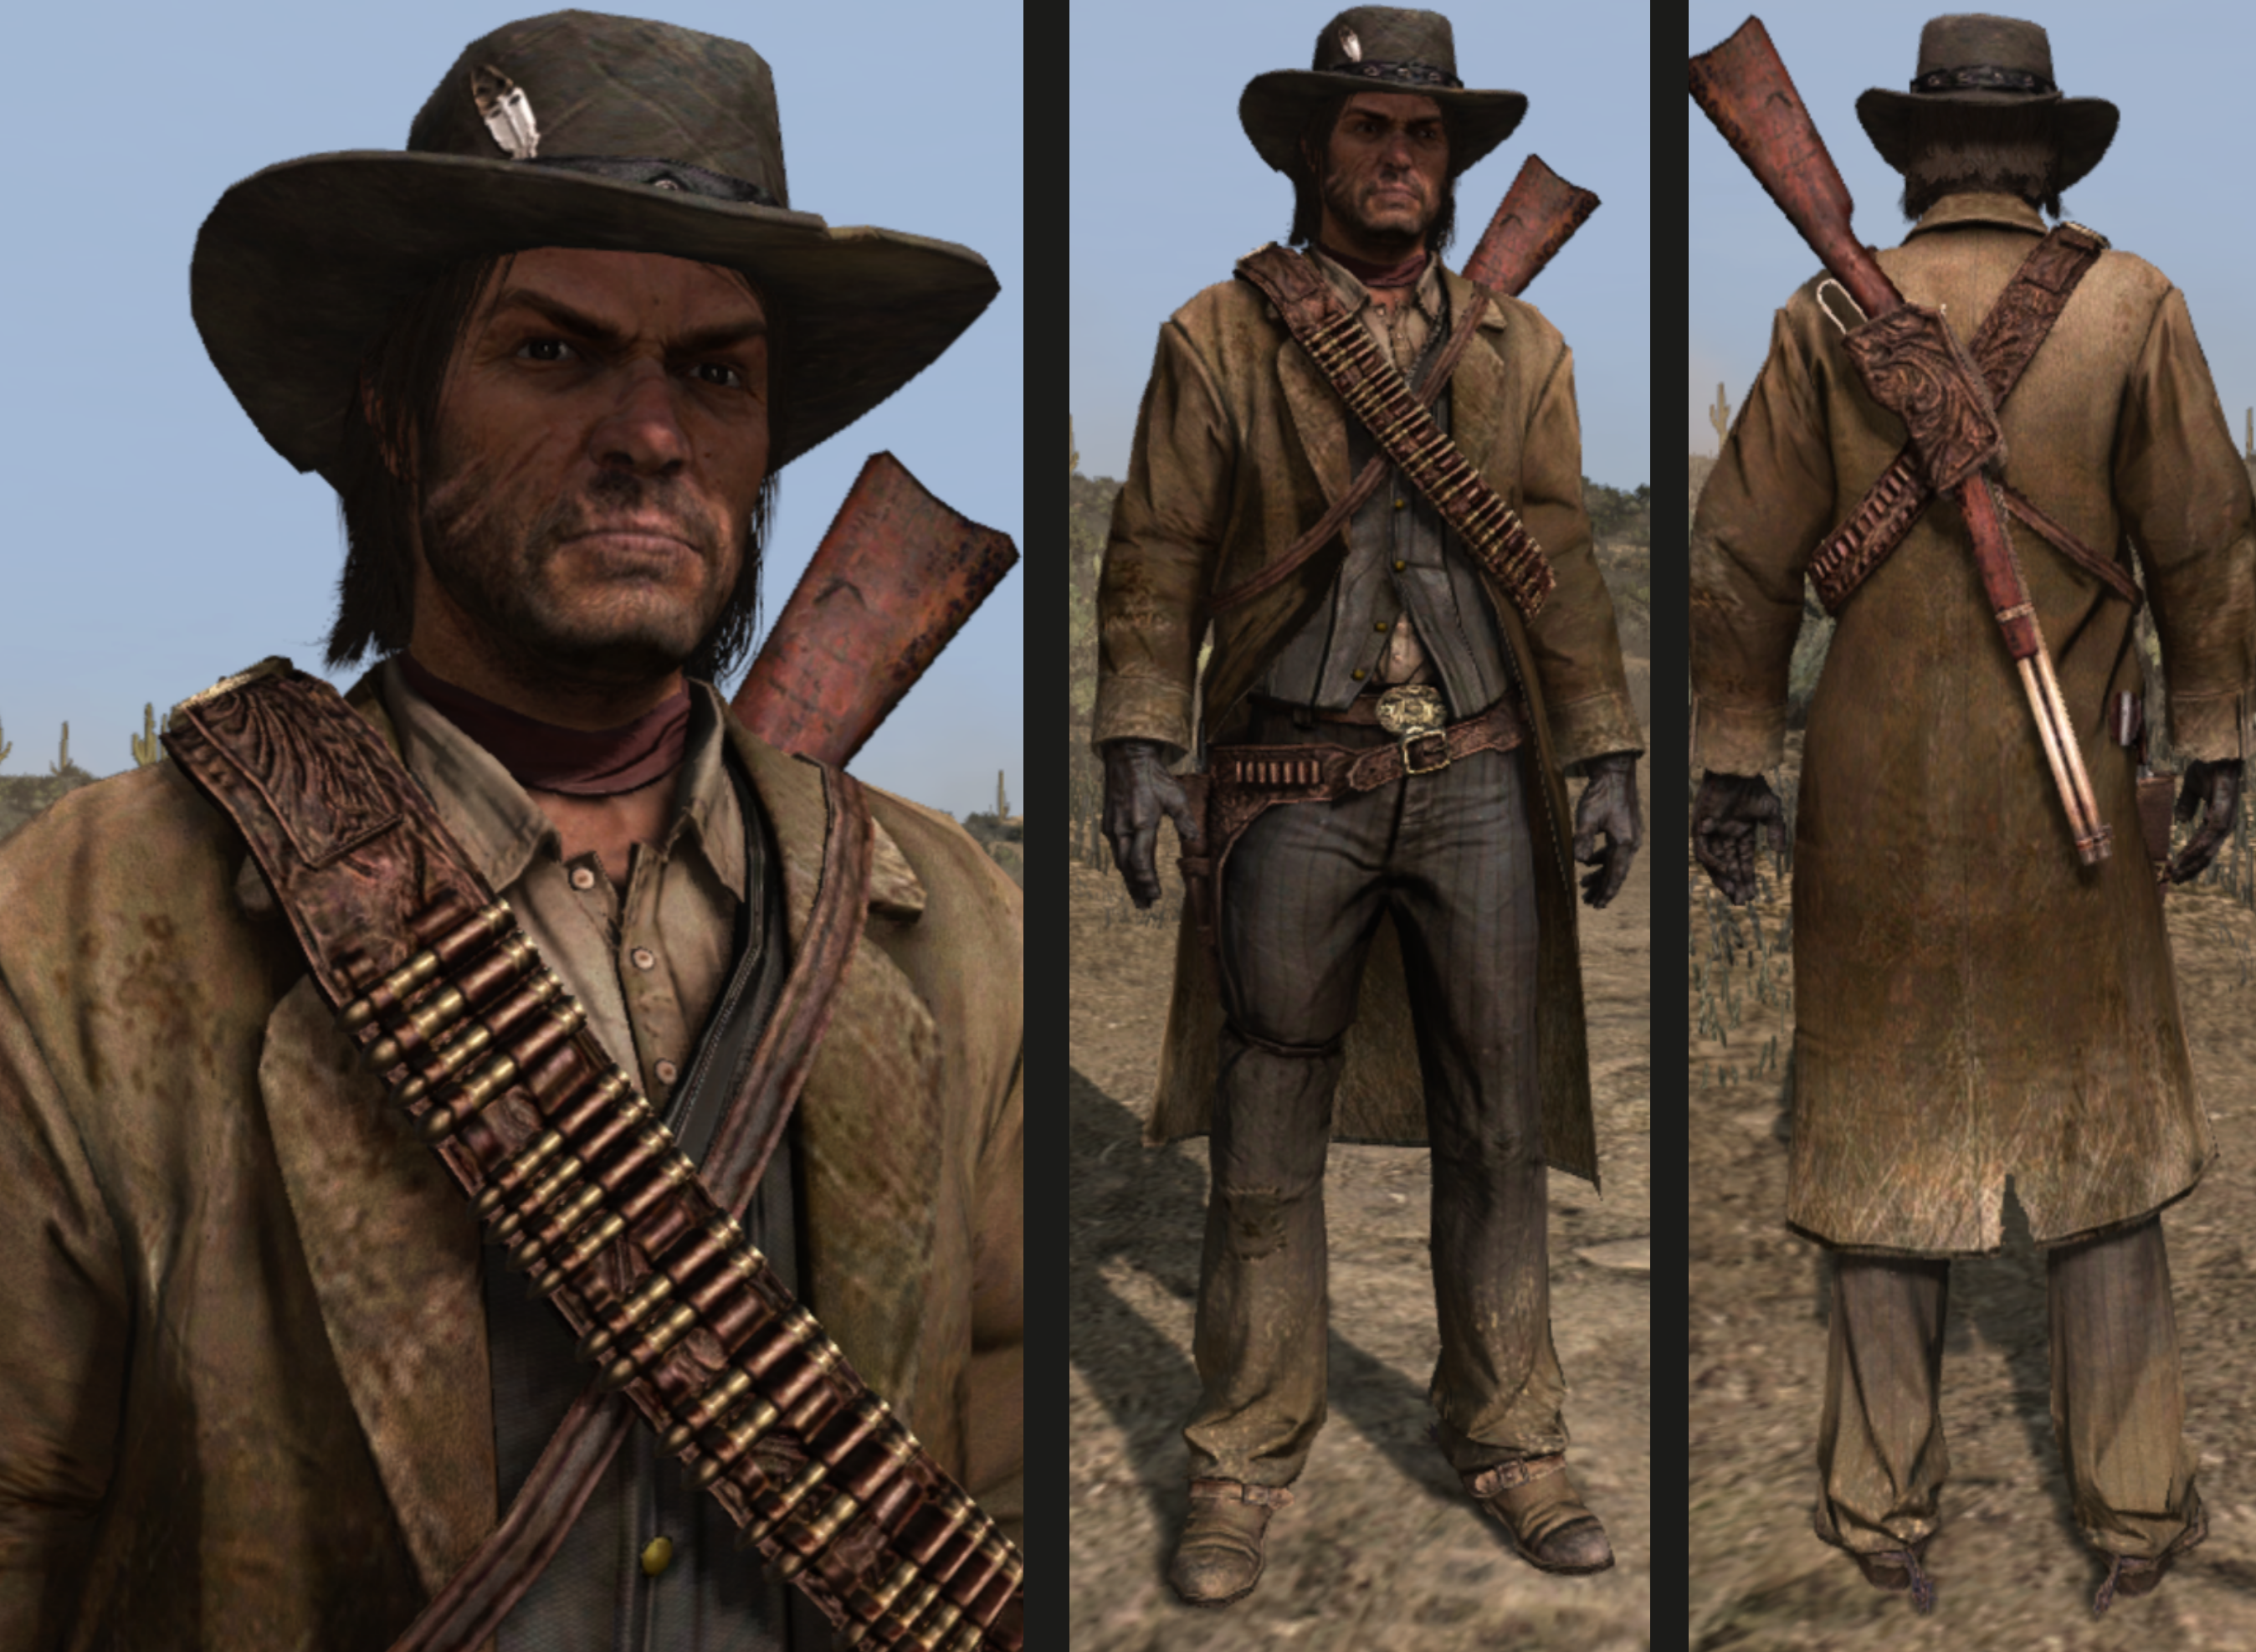 https://static.wikia.nocookie.net/reddeadredemption/images/e/ea/RDR_Duster.png/revision/latest?cb=20211221133805